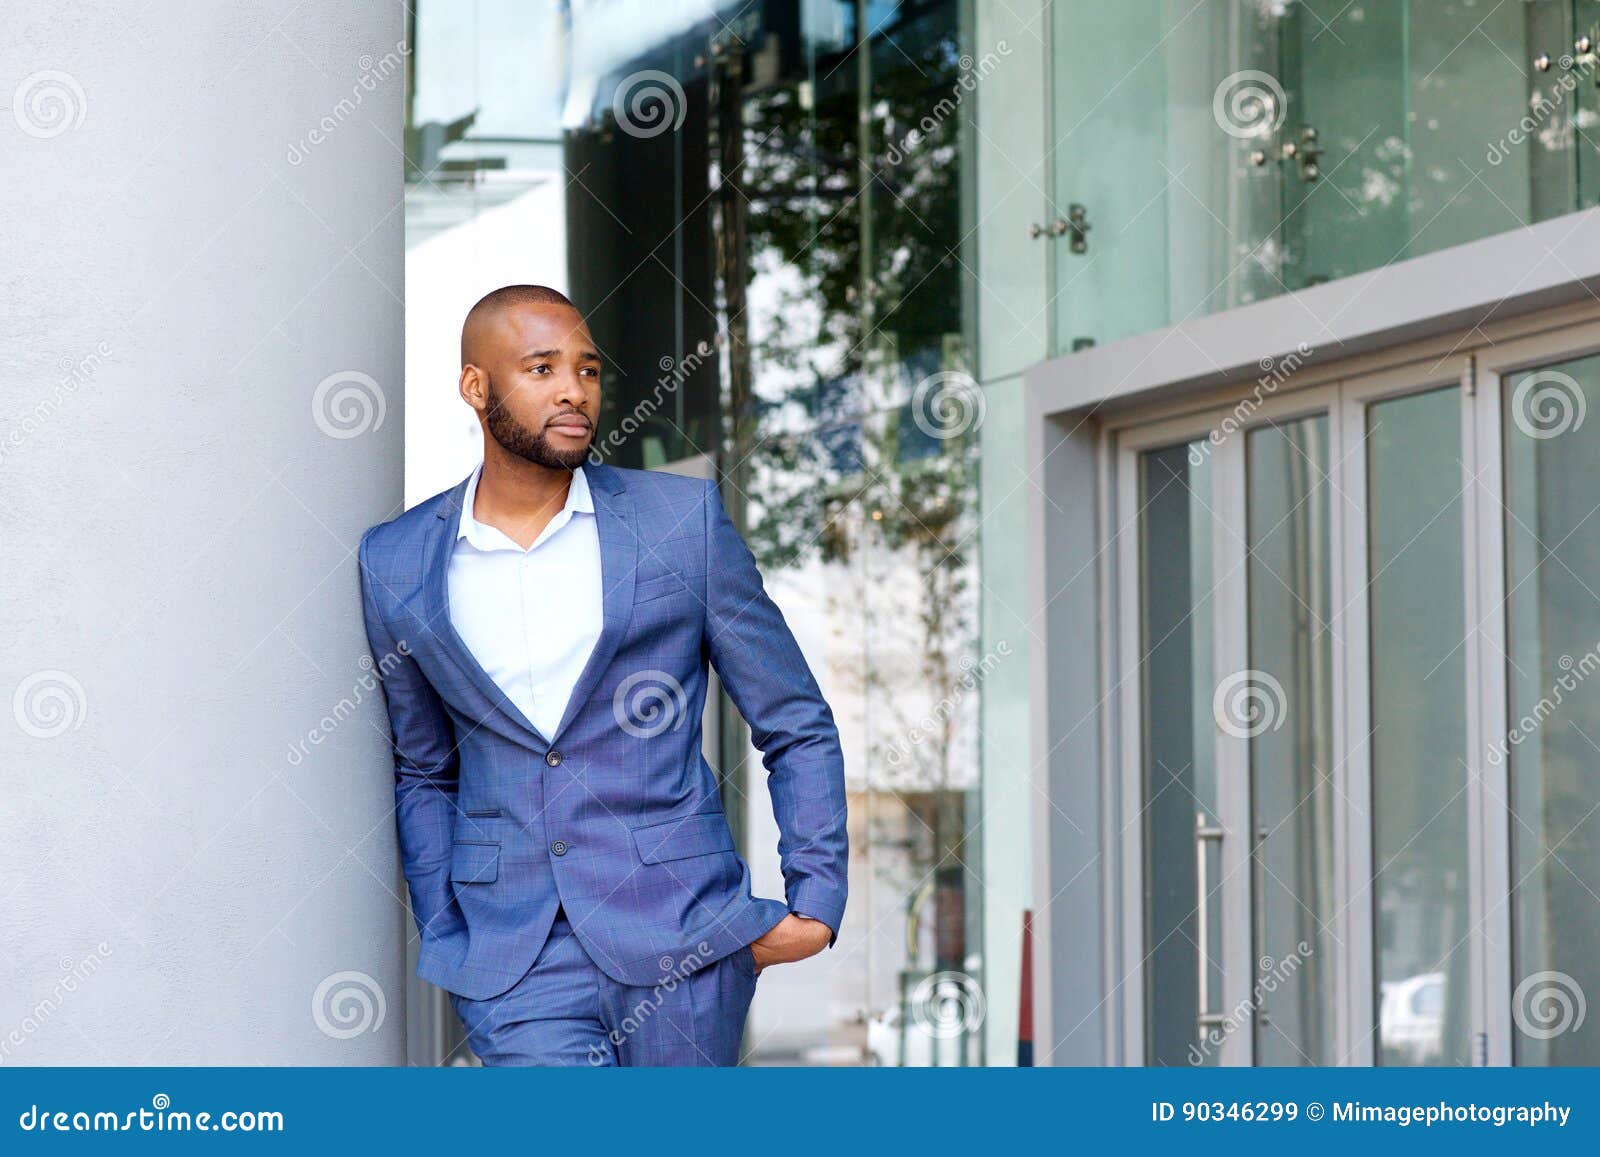 Handsome Young Man in Business Suit Leaning Against Wall Outdoors Stock ...